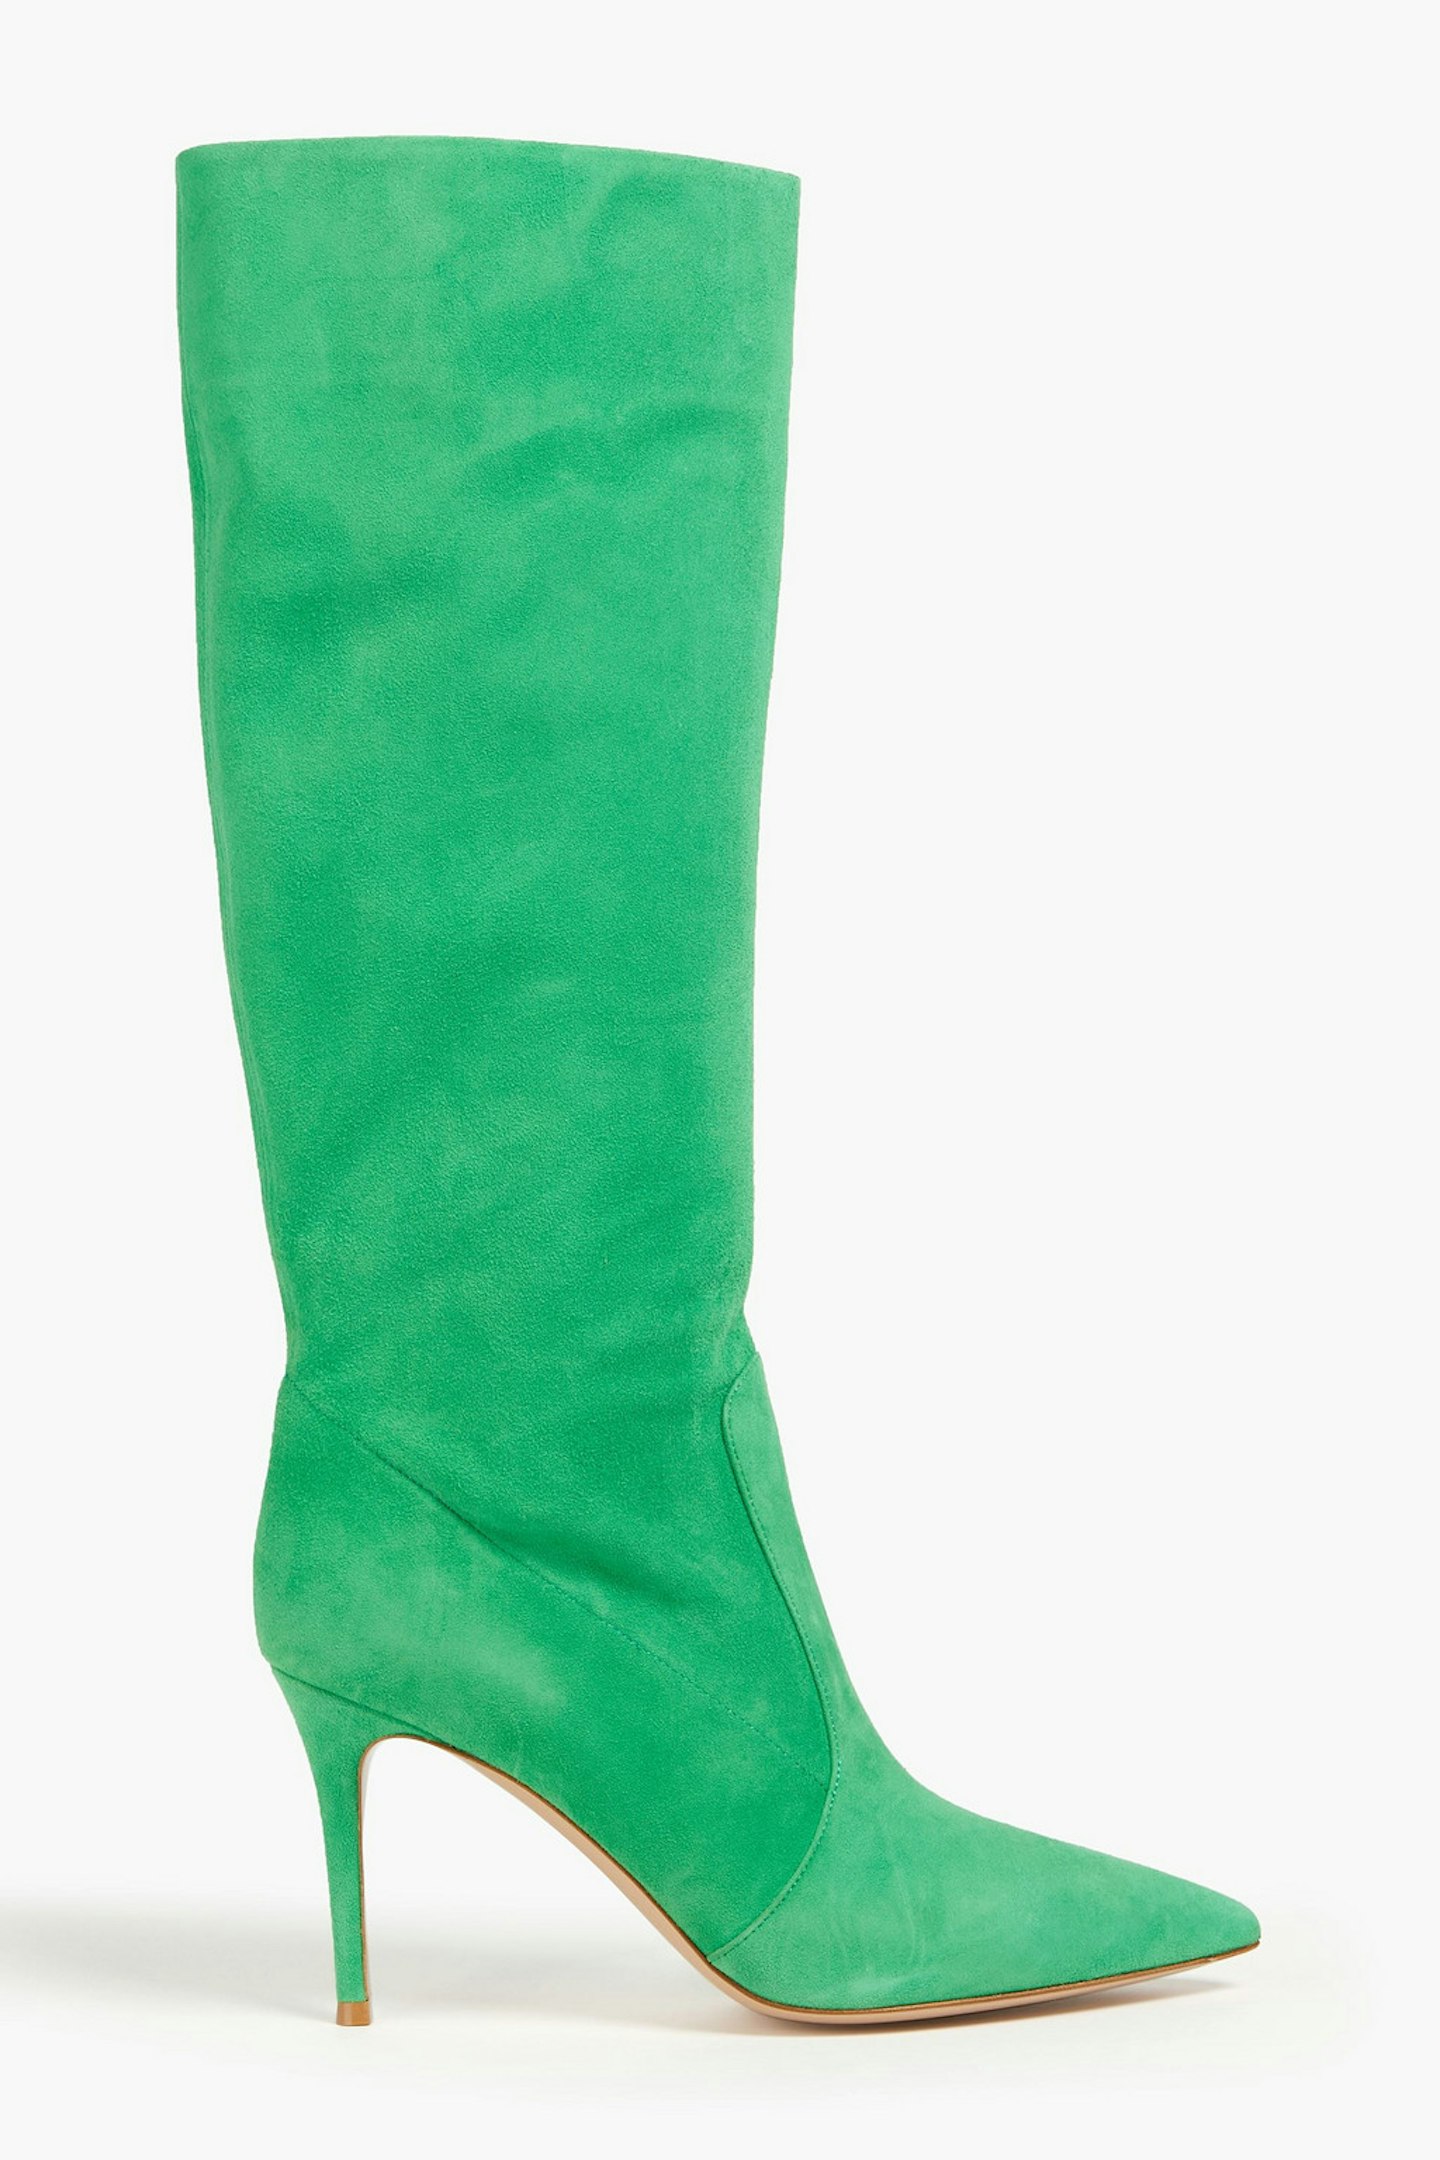 gianvito rossi knee high boot outfits